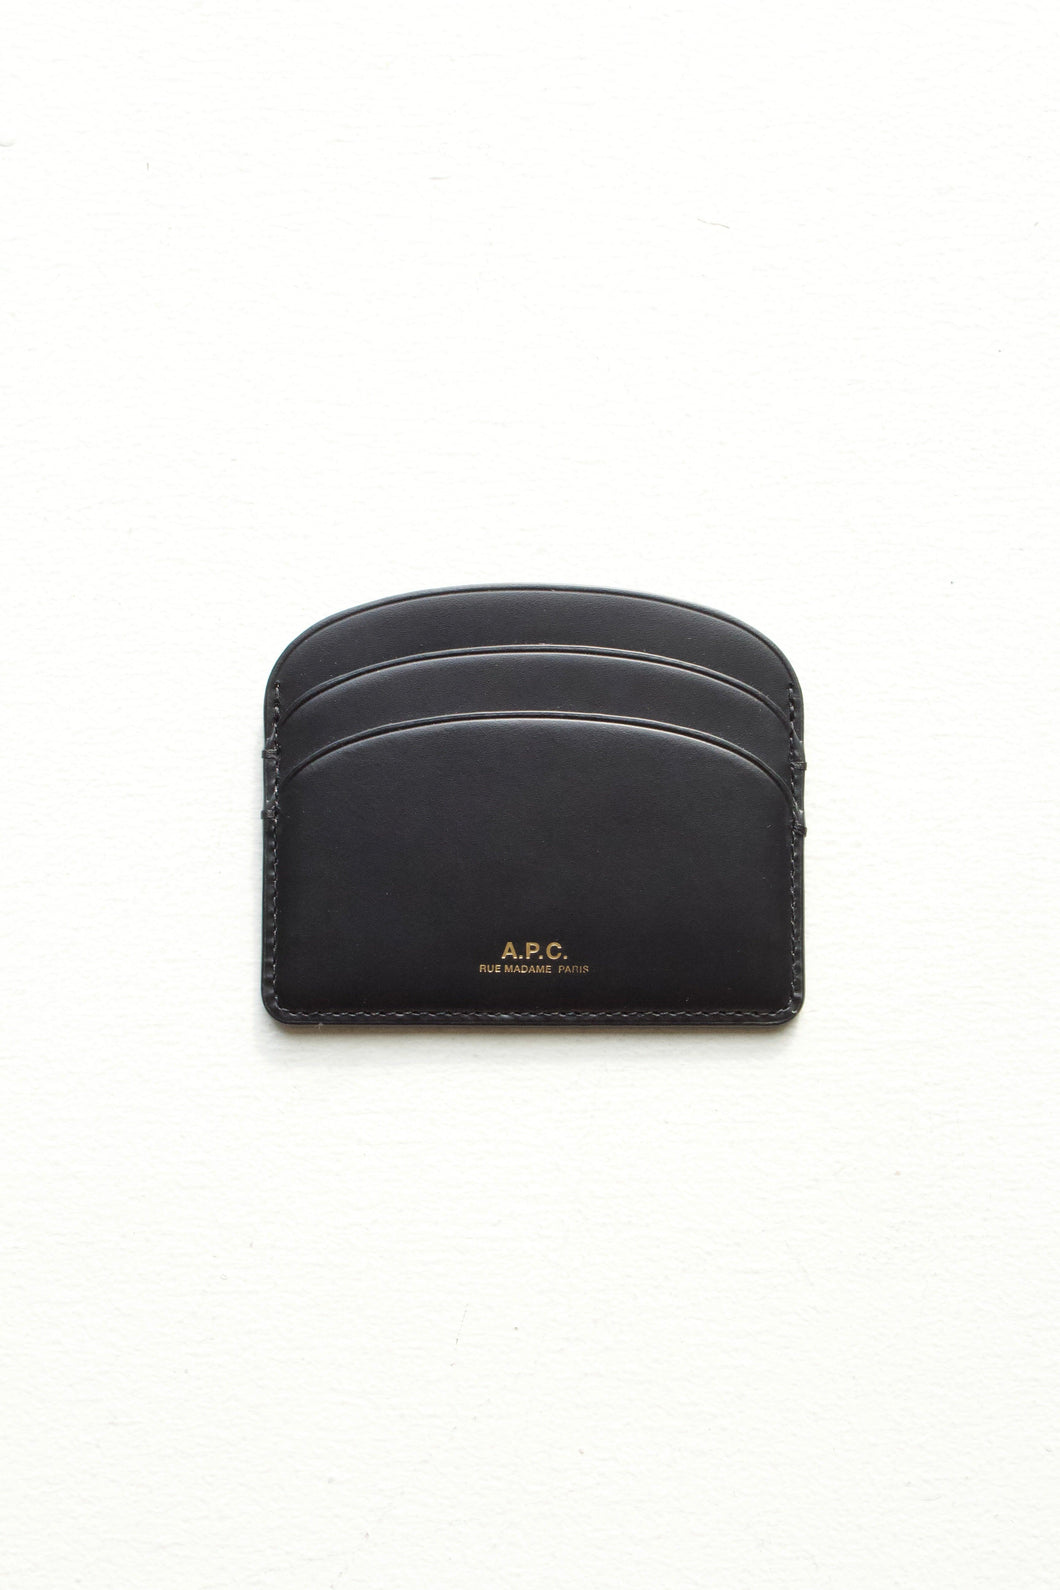 Demi-Lune Cardholder - Black calfskin leather- this true onyx black accessory features a slightly shiny finish